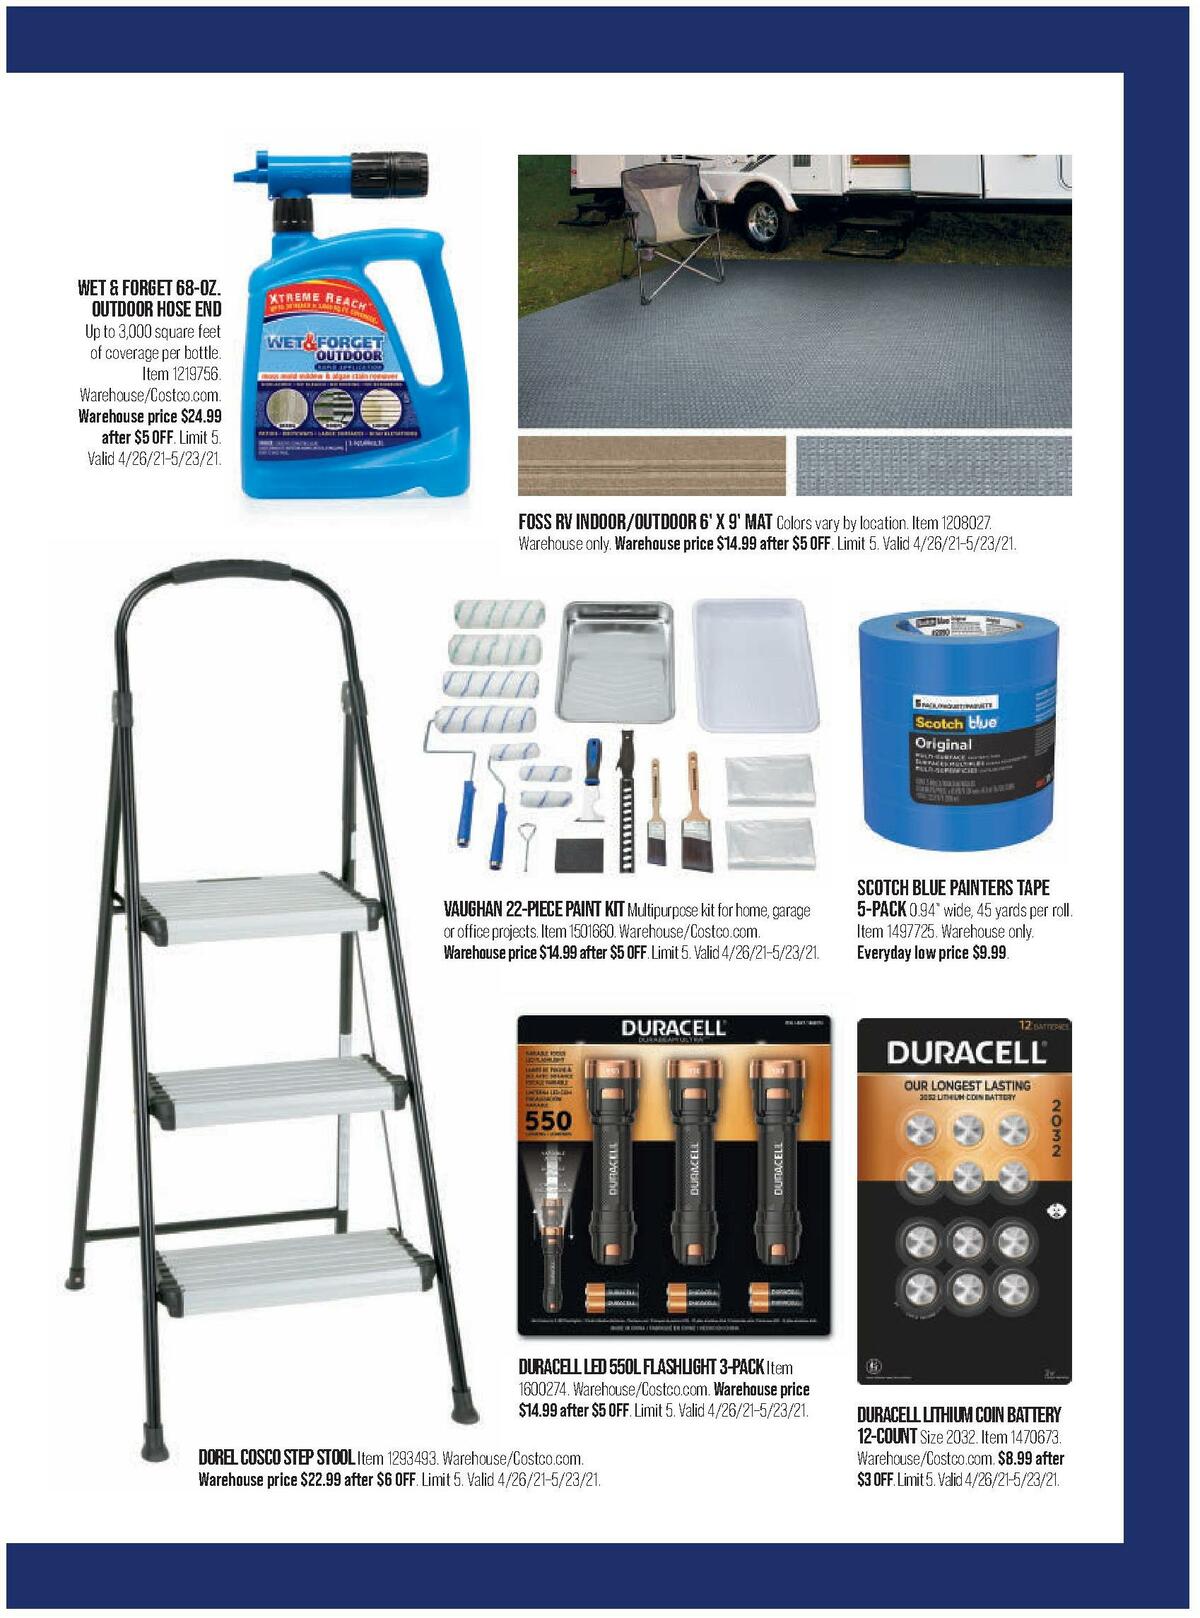 Costco Connection Weekly Ad from May 1